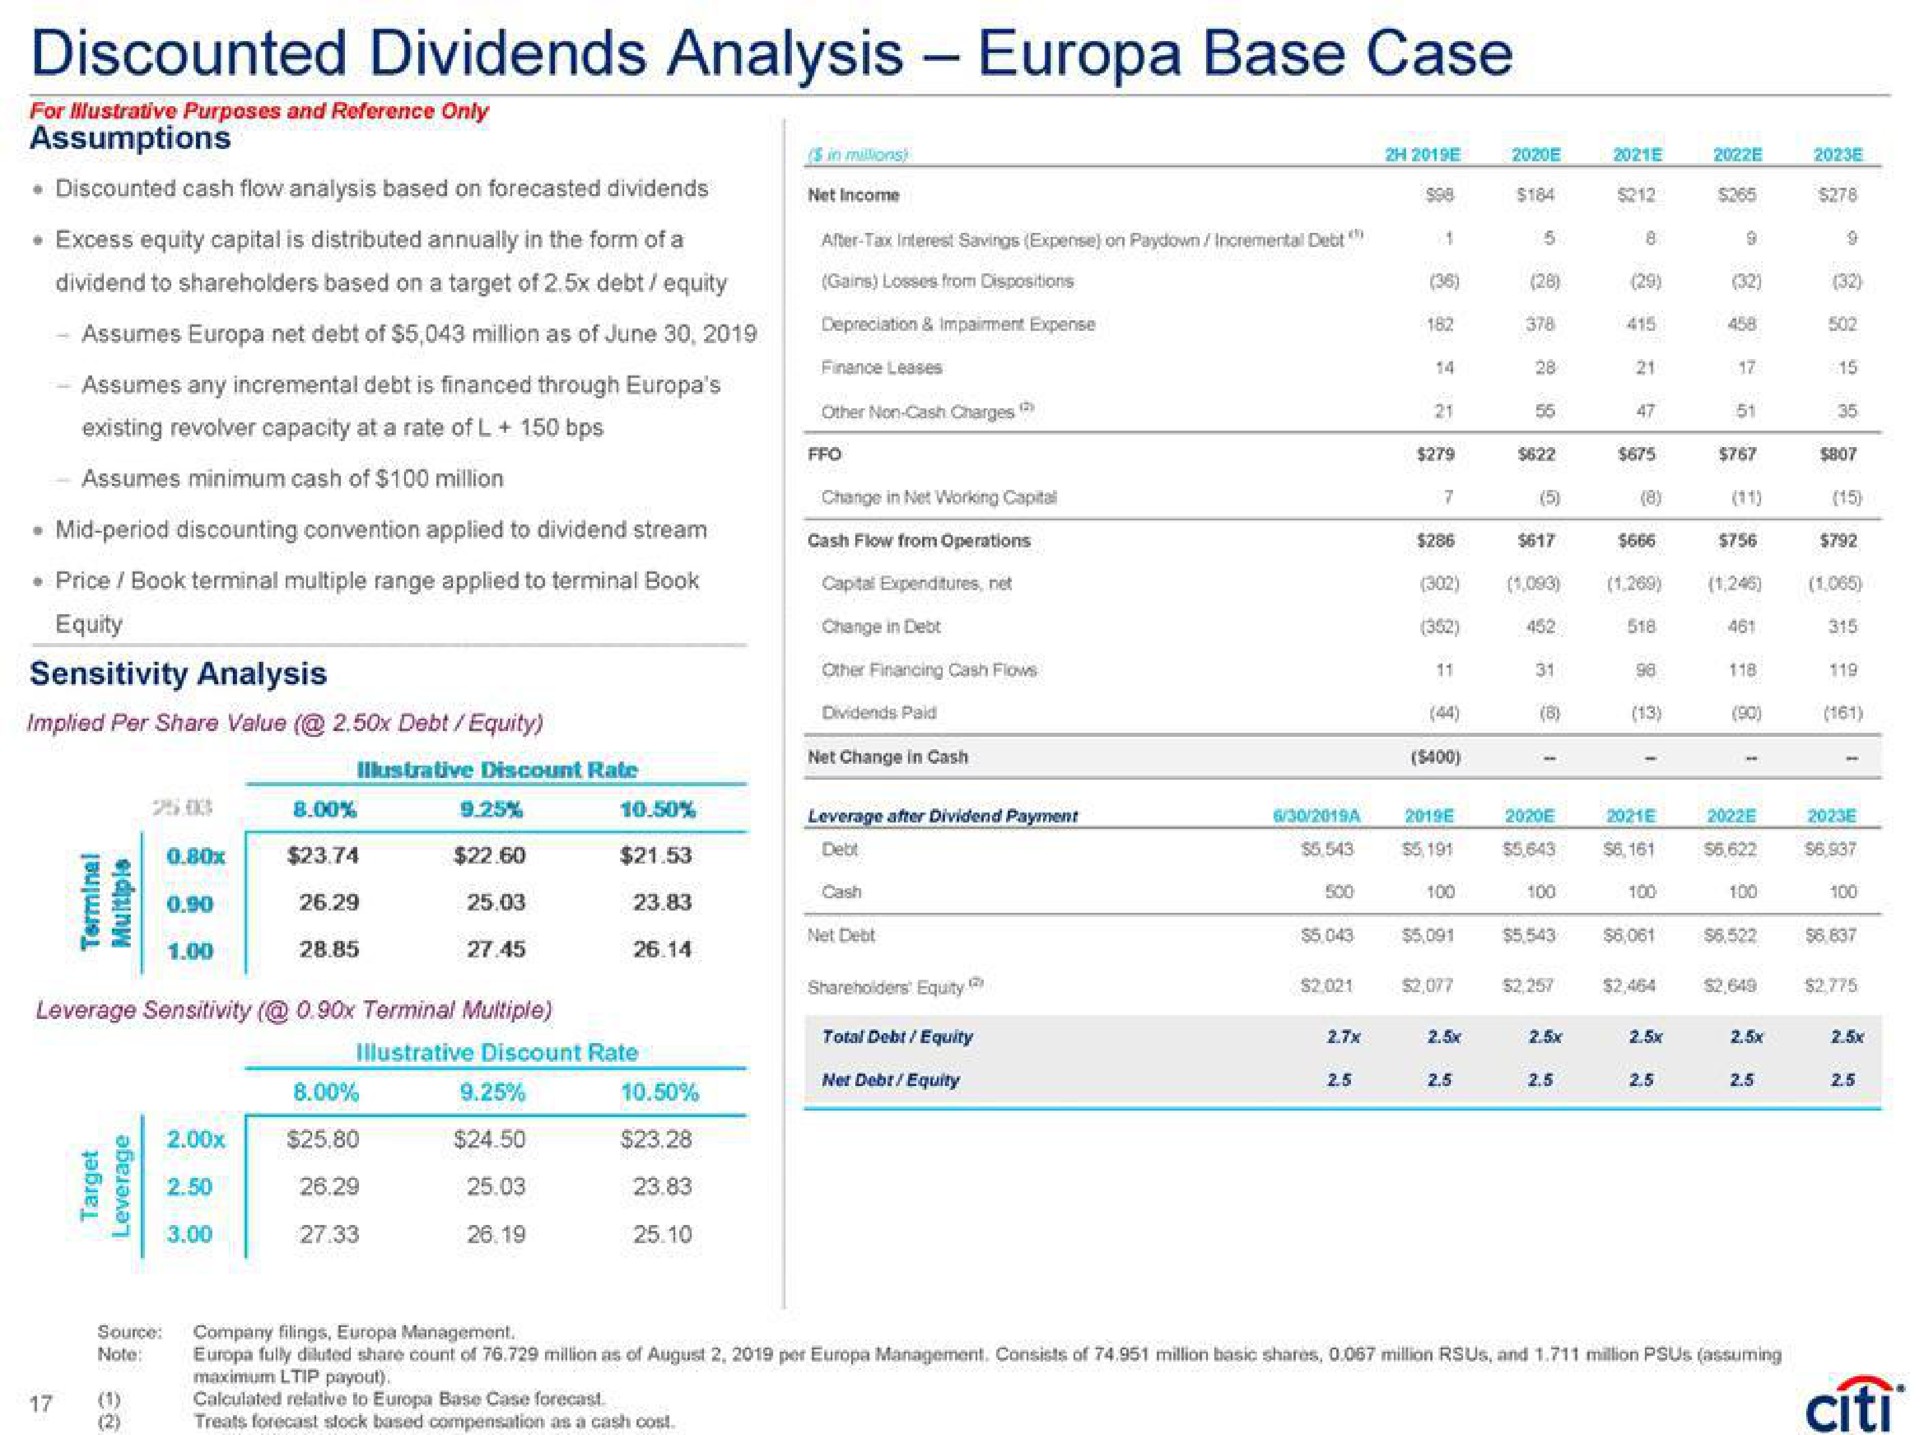 discounted dividends analysis base case sensitivity analysis implied per share value debt equity illustrative discount rate | Citi